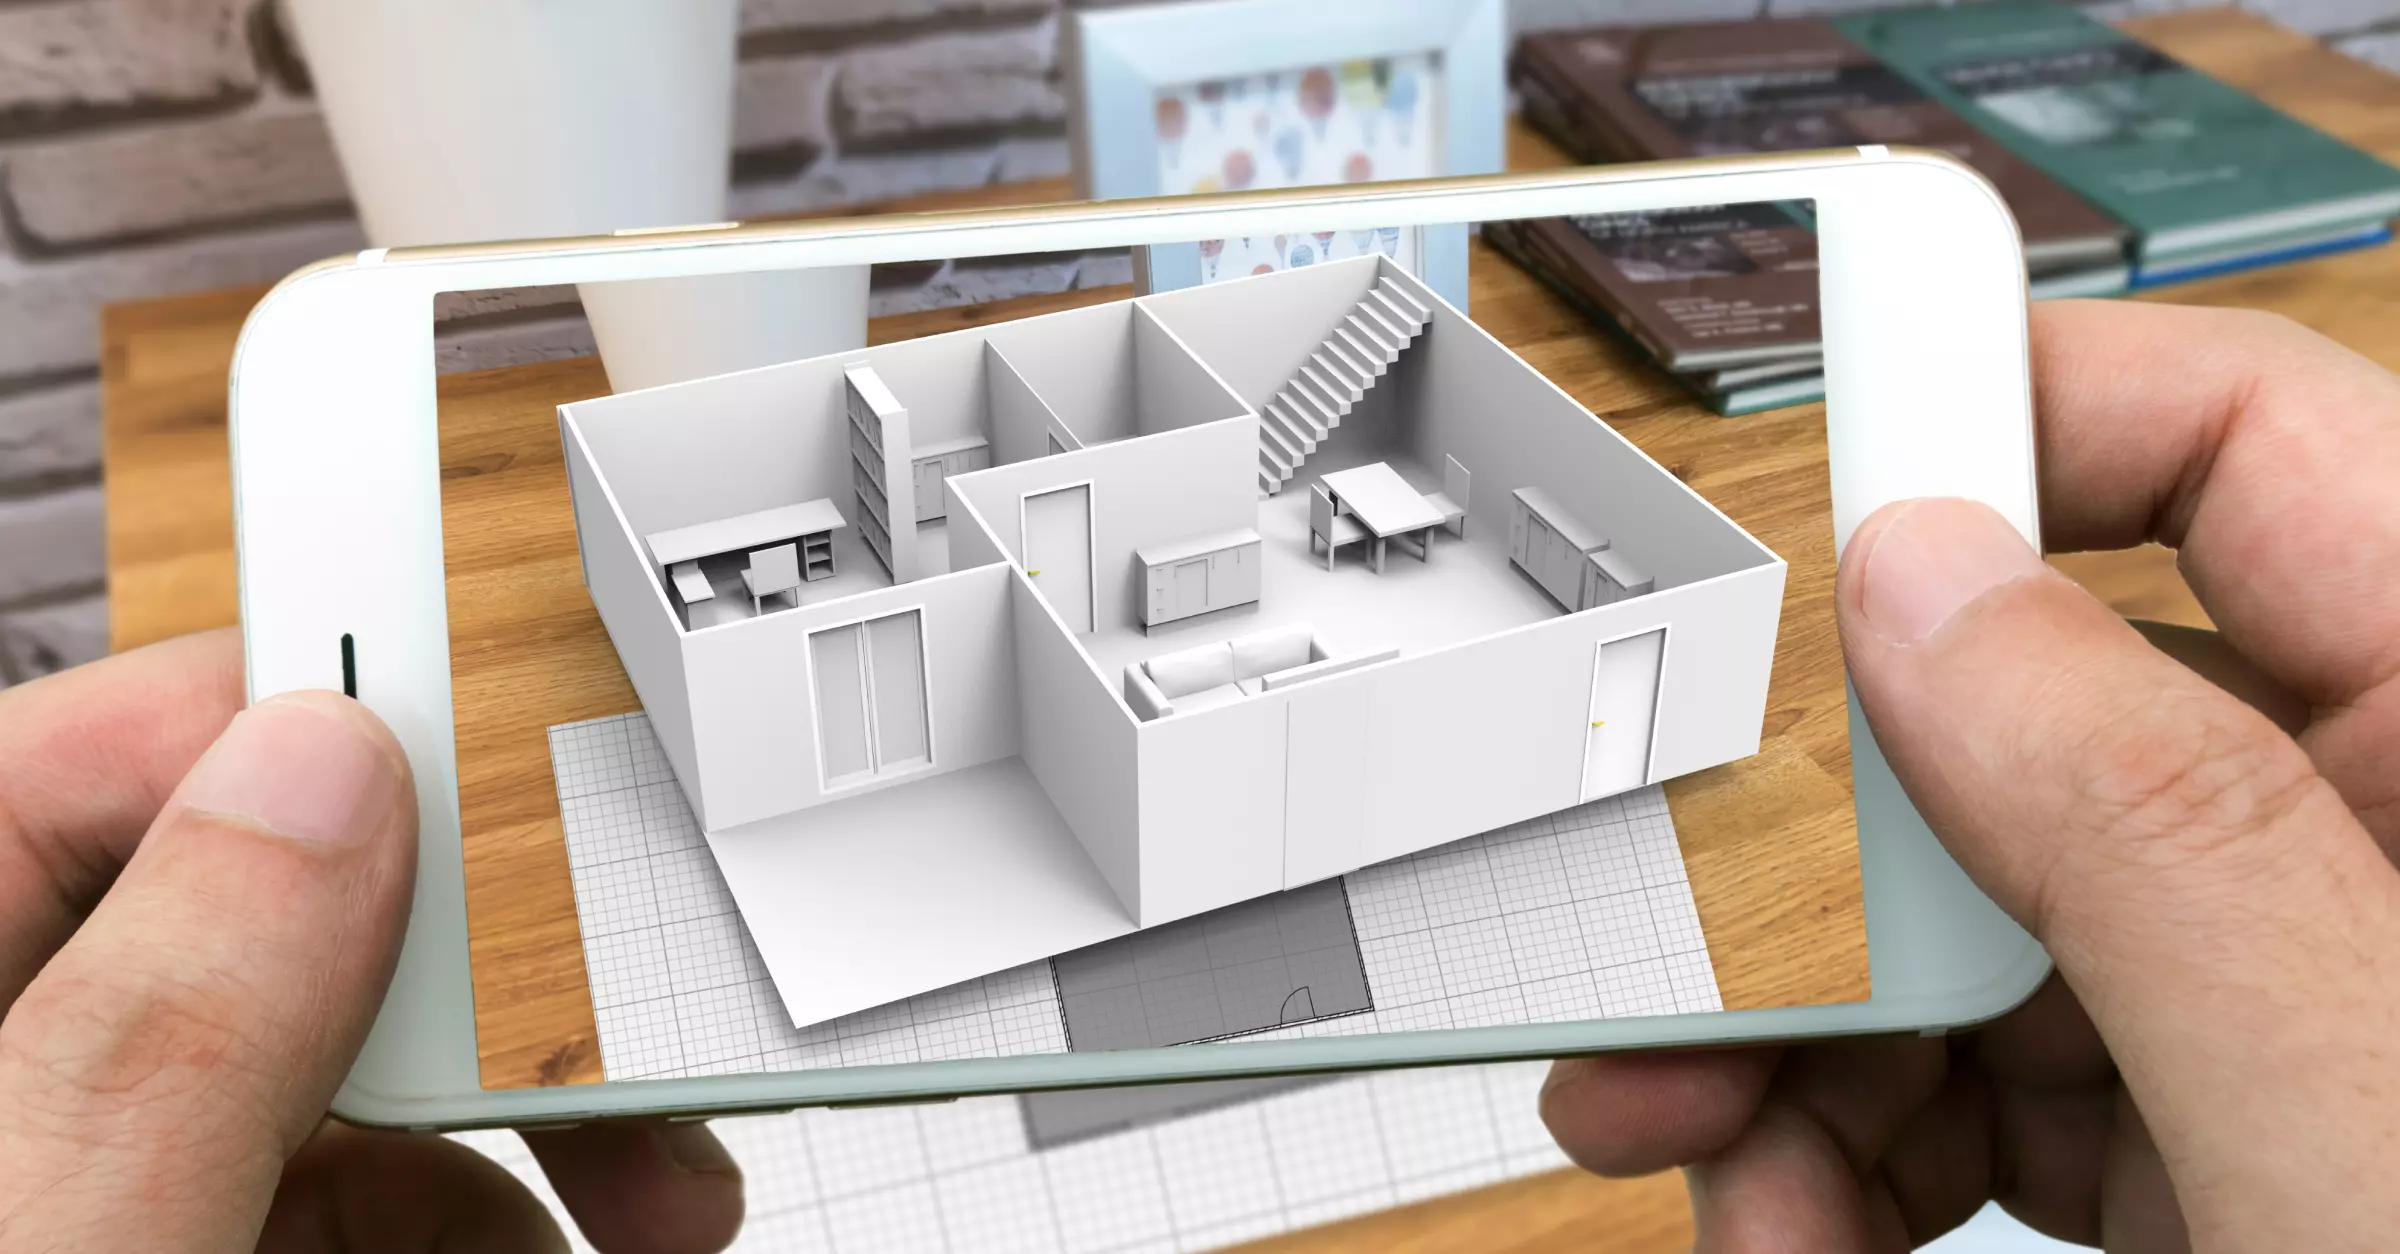 Learn with Sphere: Design Features in Augmented Reality (AR)